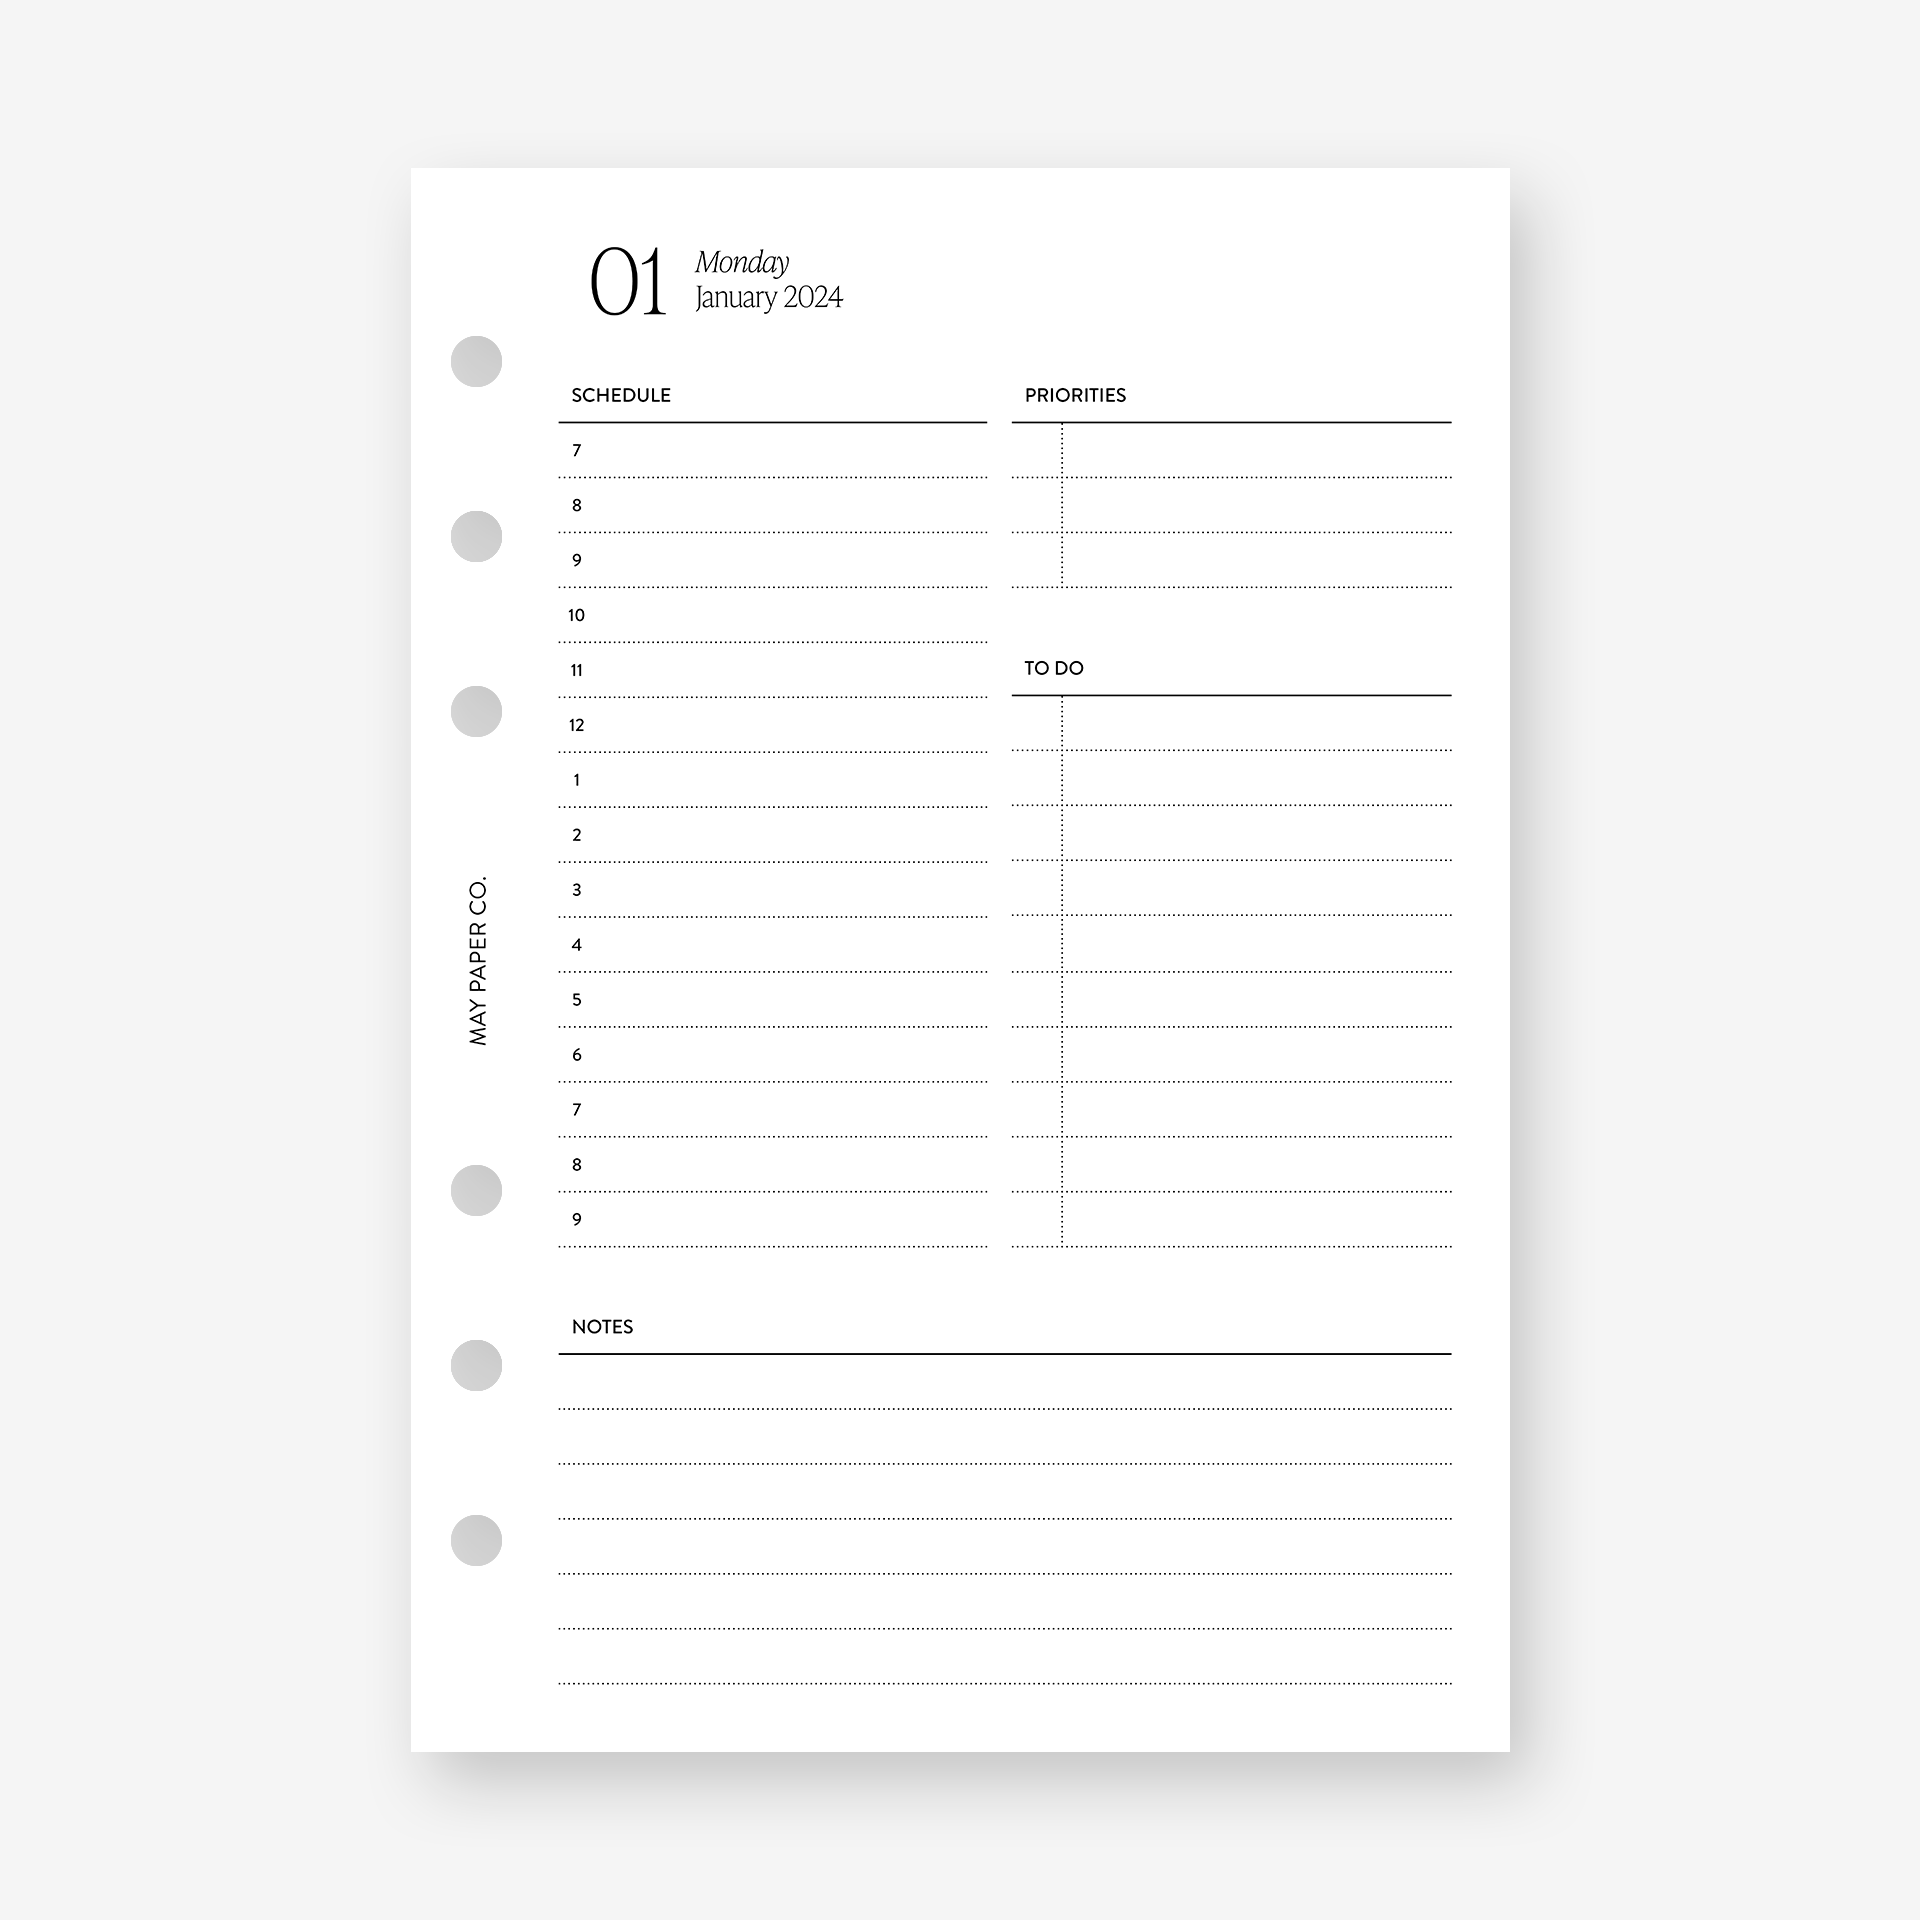 Pocket 2023-2024 Monthly Planner Inserts